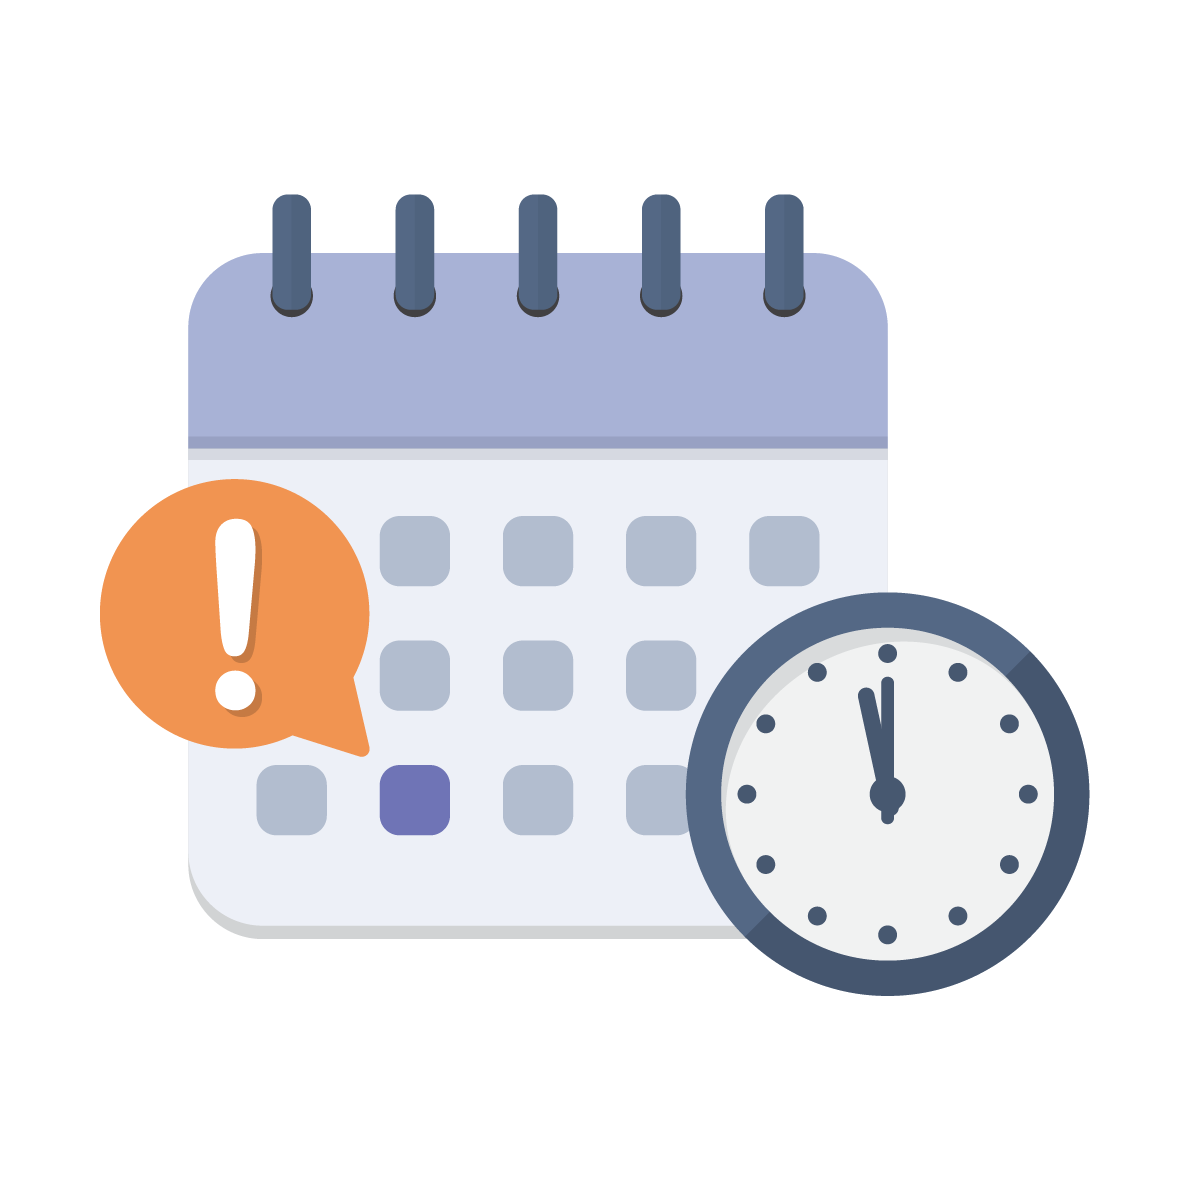 Calendar and clock with an alert icon over a day - to represent a due date